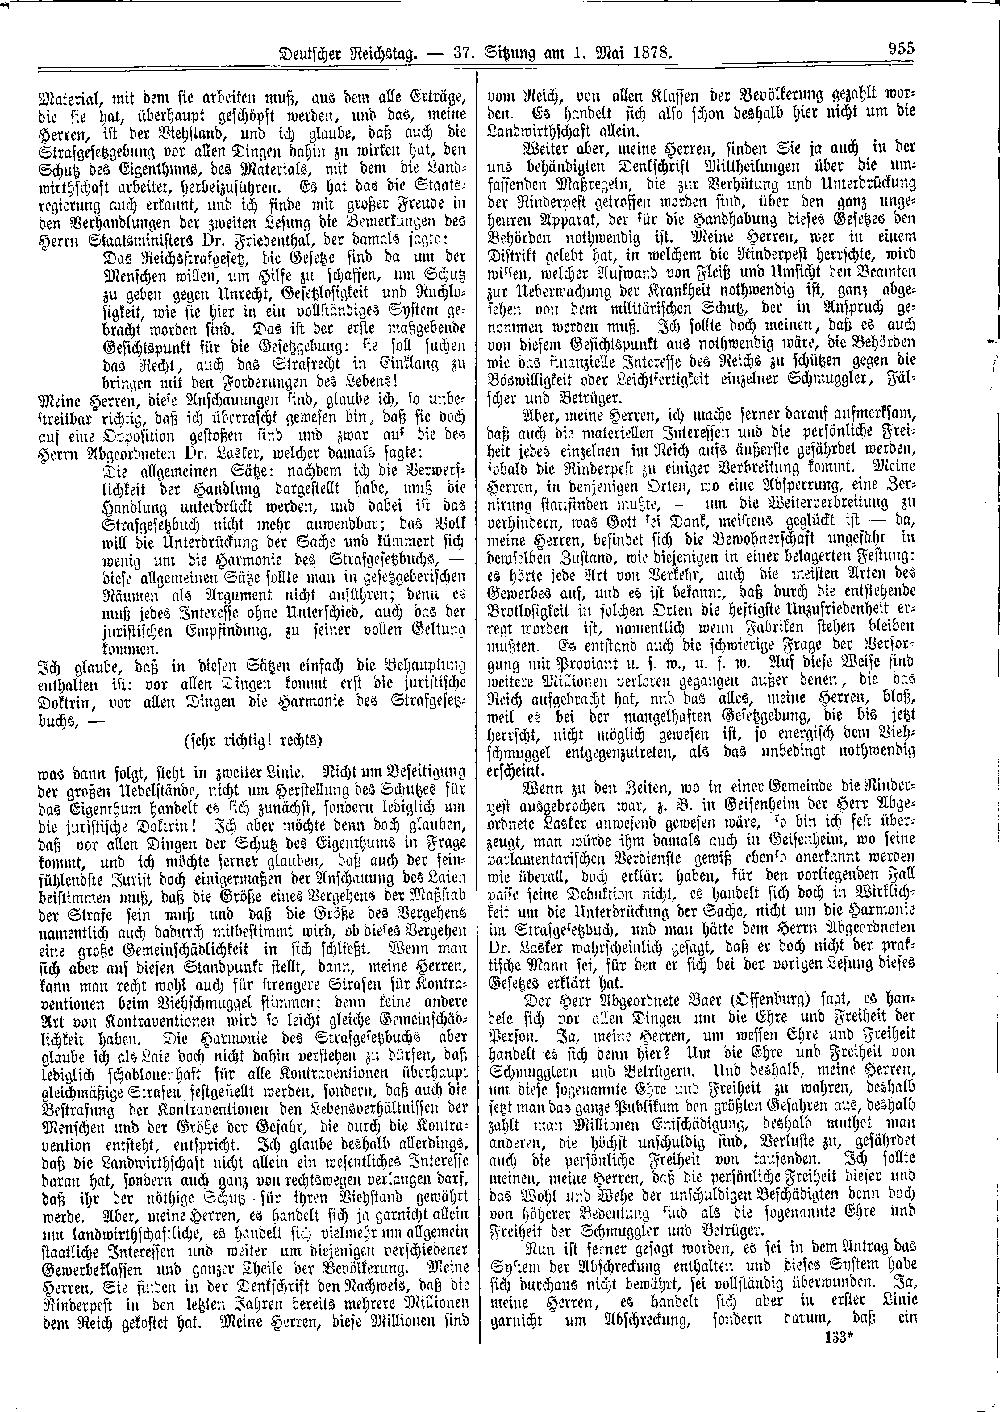 Scan of page 955